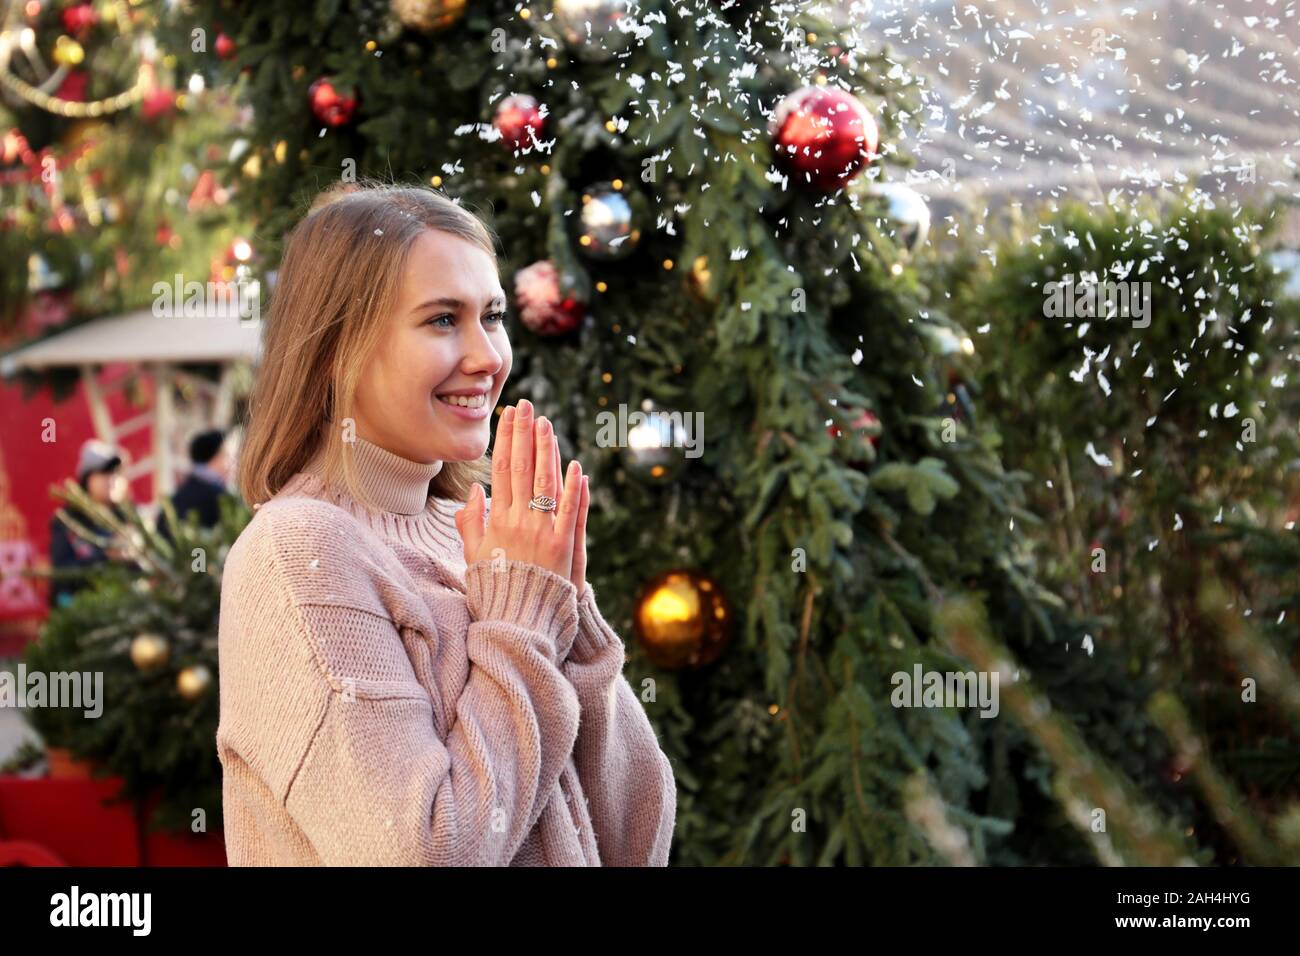 Happy girl laughing and enjoys the snow during standing on New Year tree background during traditional festival Journey to Christmas Stock Photo